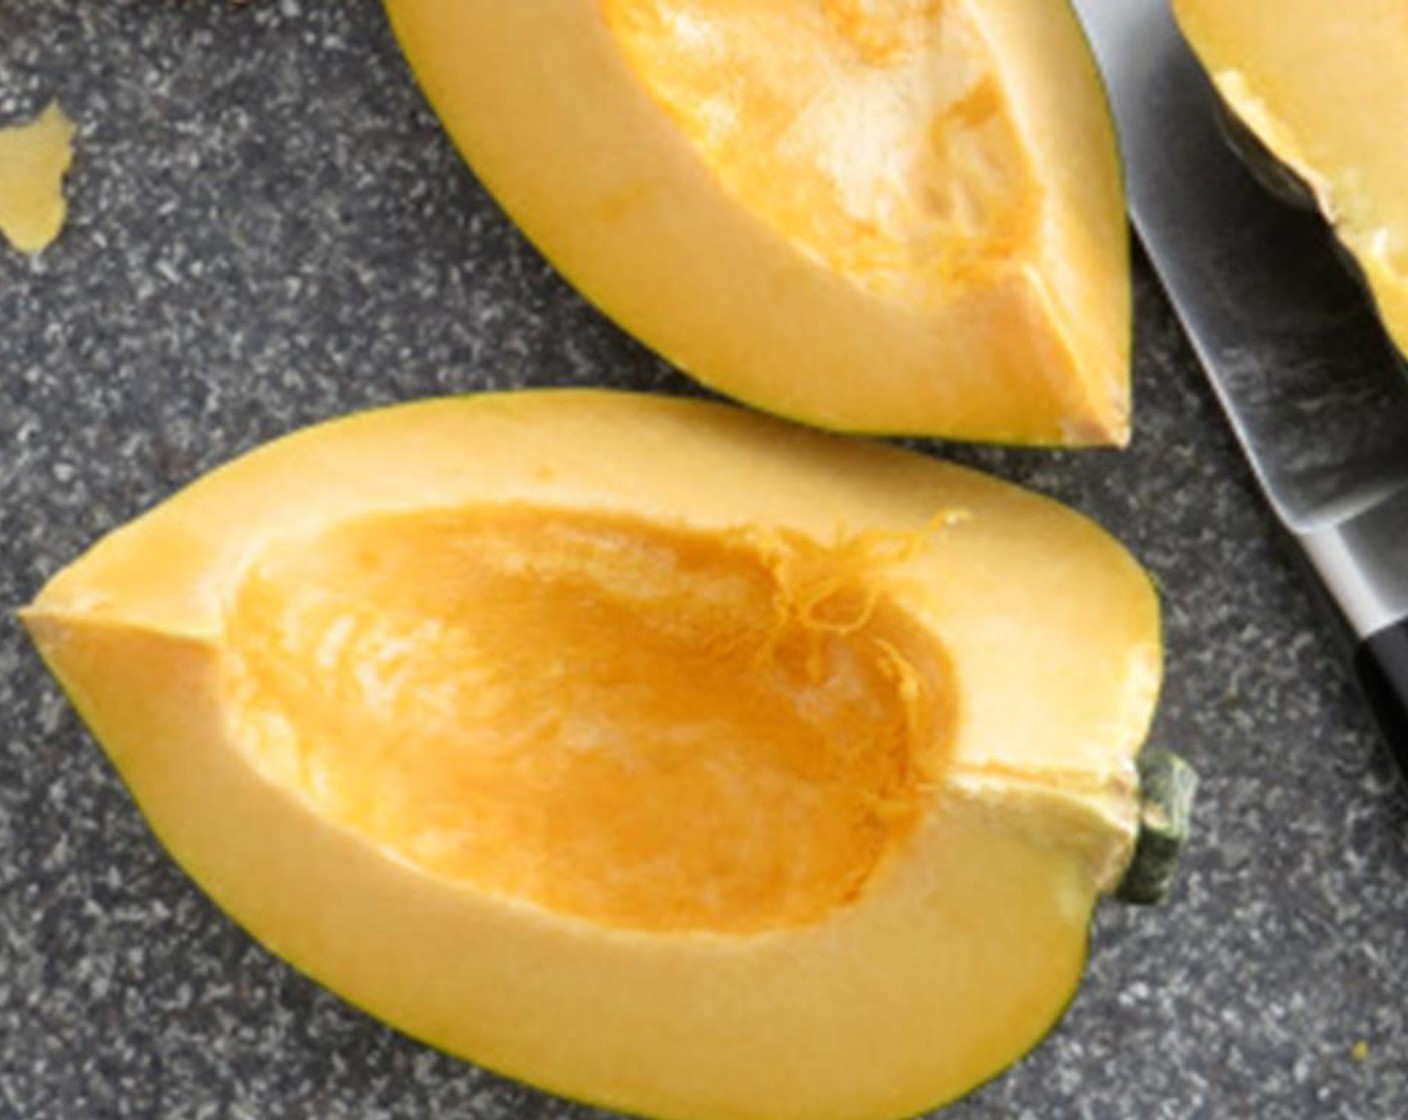 step 4 Cut the Acorn Squash (1) half lengthwise. Scoop out the seeds and discard. Set the cut side down on a cutting board. Halve it again lengthwise. Place on a roasting pan and coat each with Olive Oil (1/2 Tbsp).